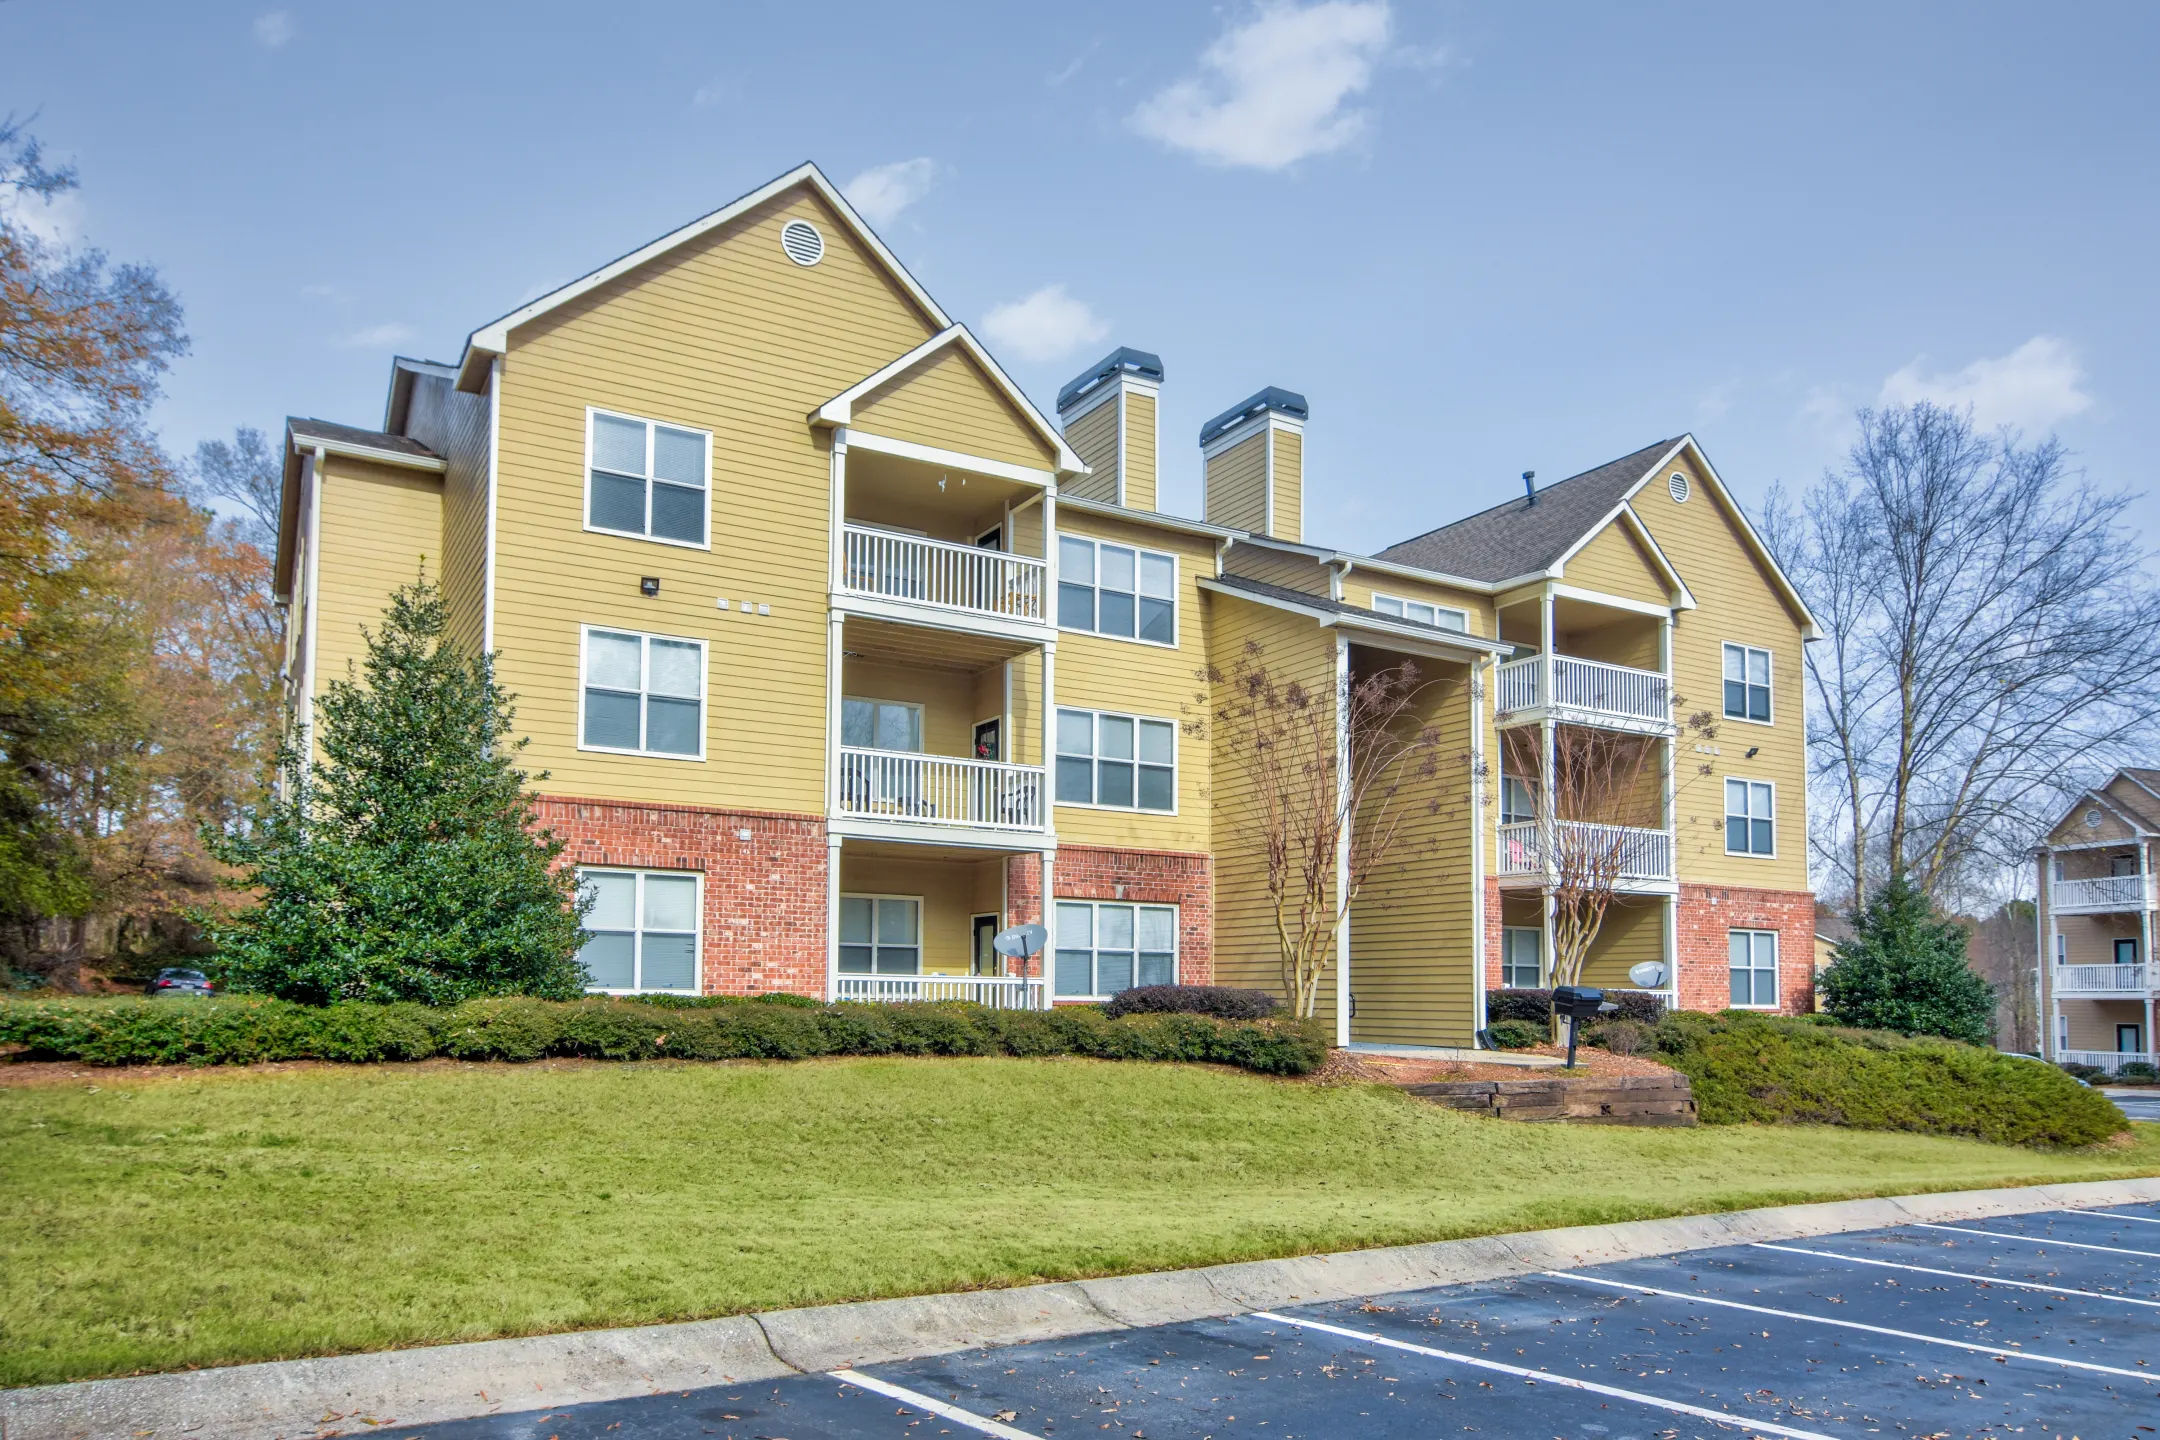 Building - Manchester Place Apartments - Lithia Springs, GA